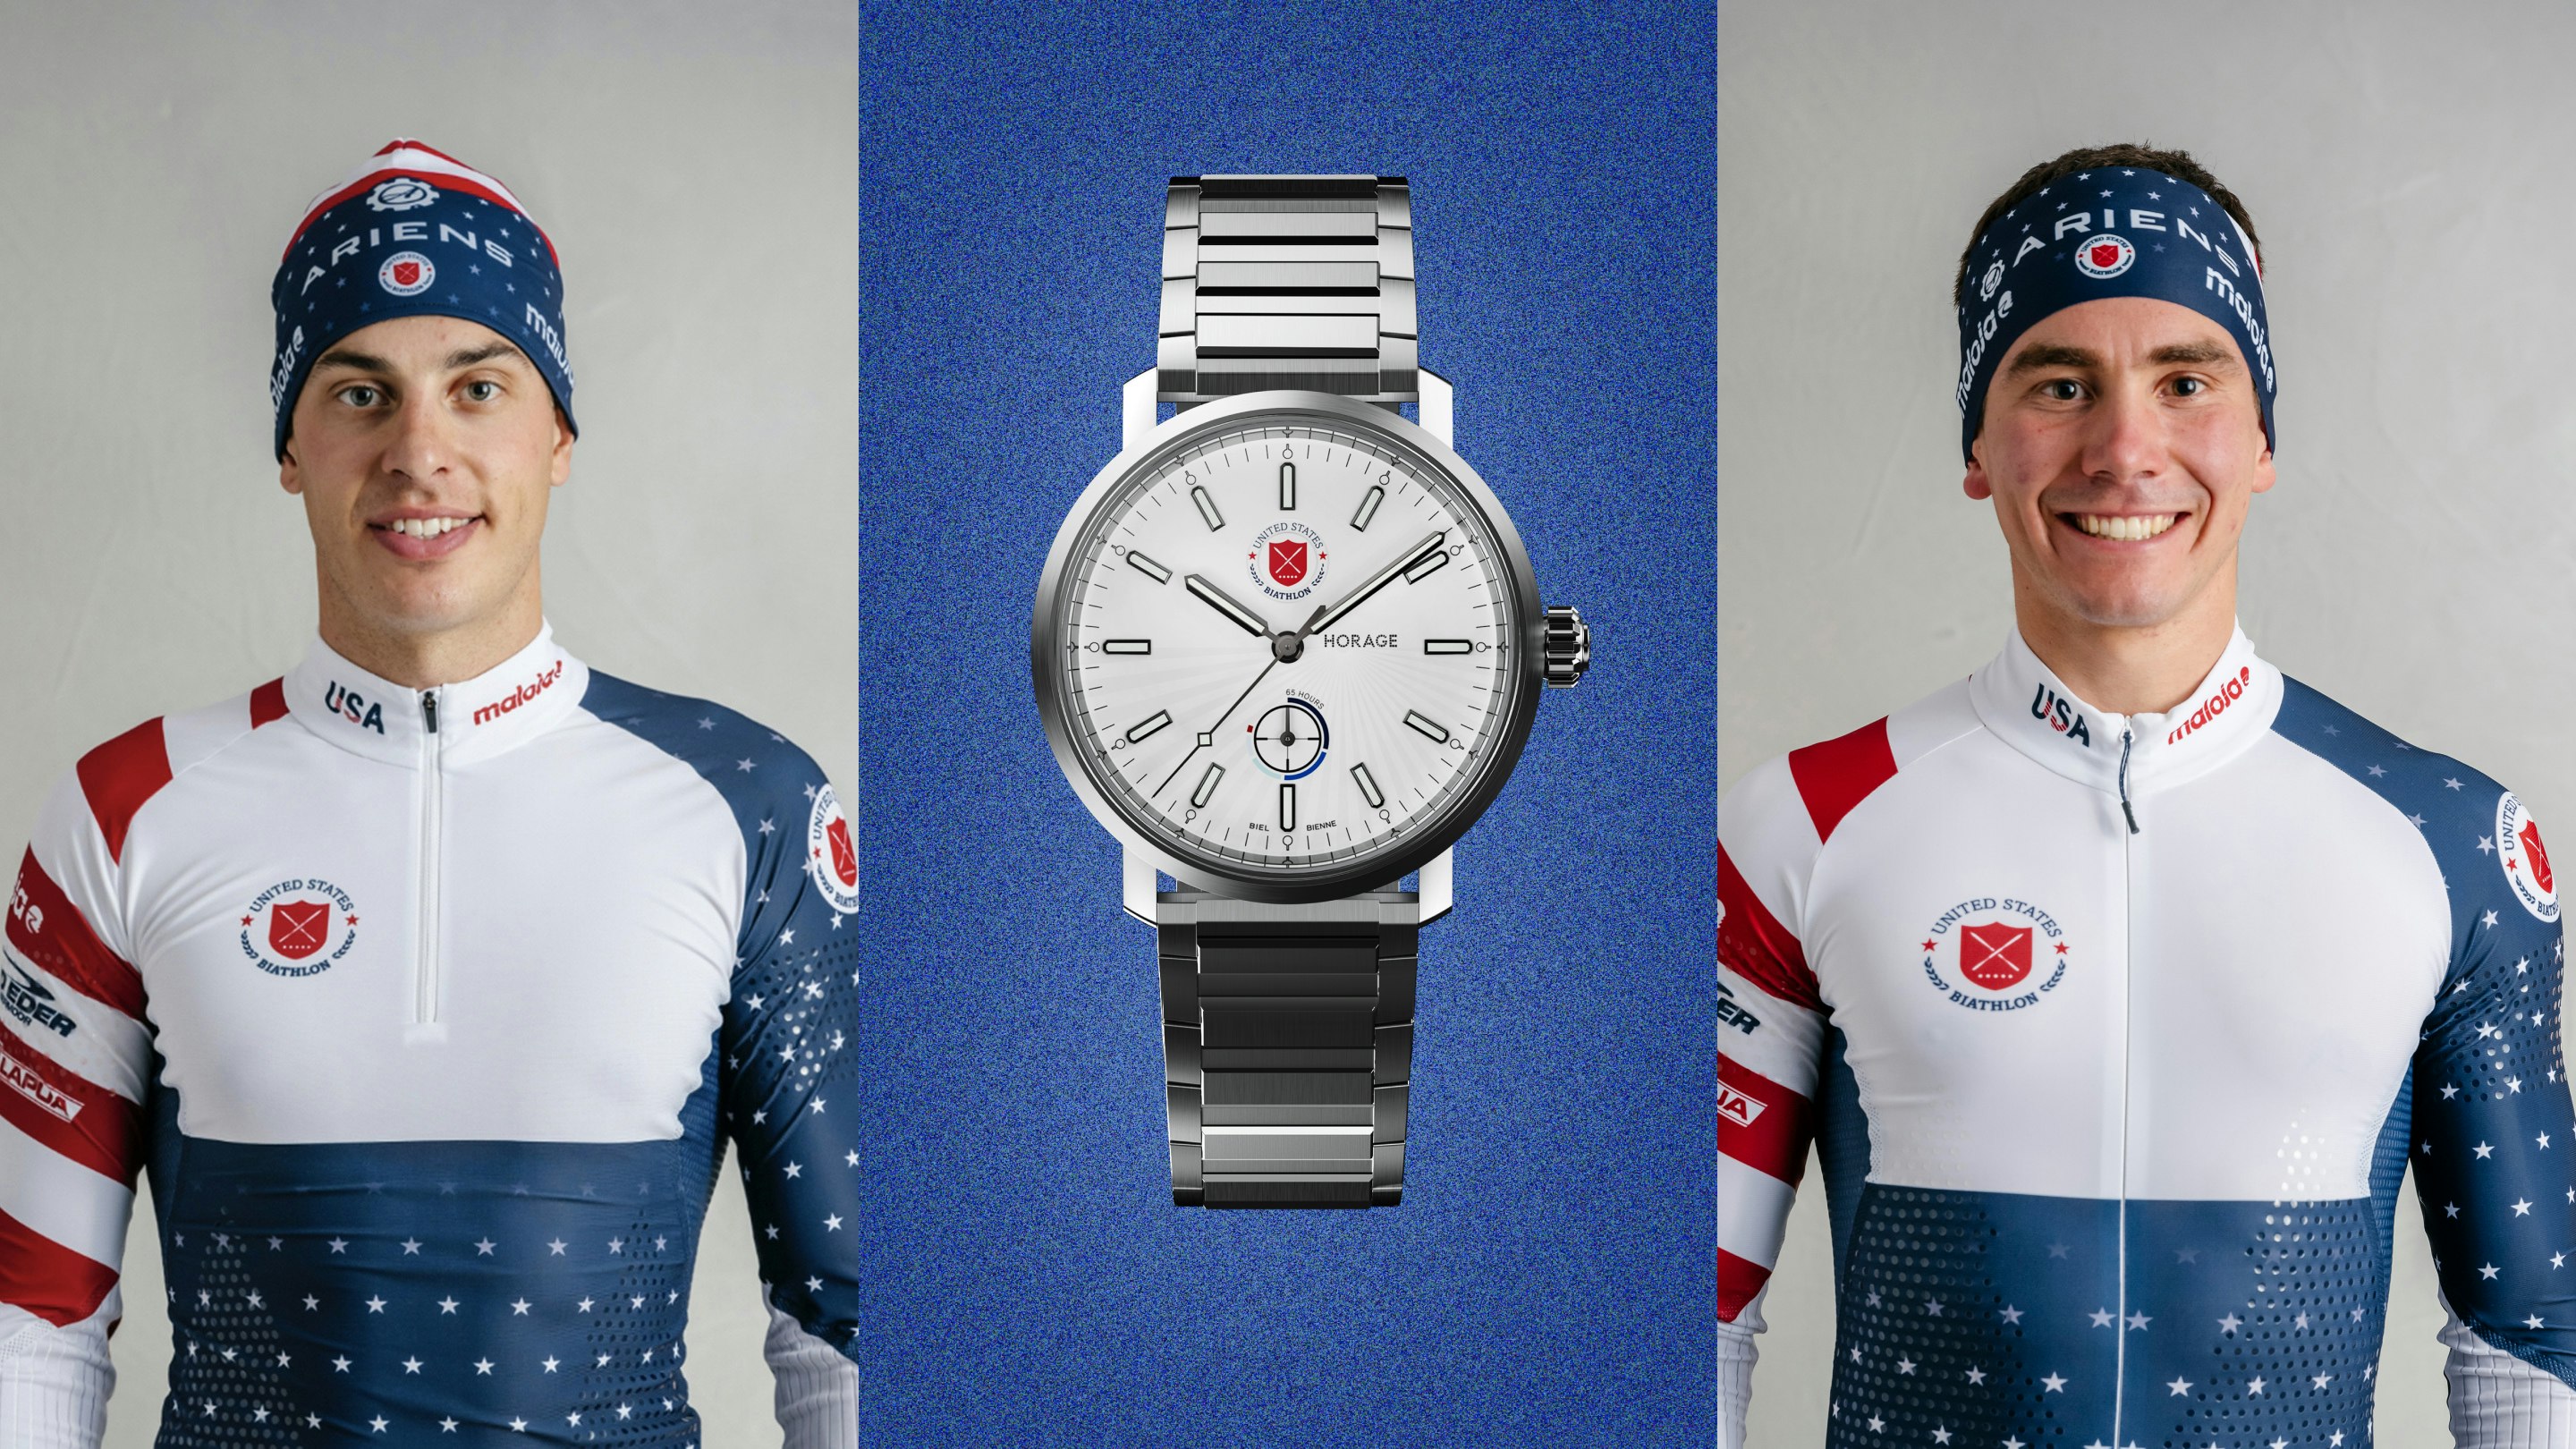 Check Out the Official Watch of the US Olympics Biathlon Team Made By Horage